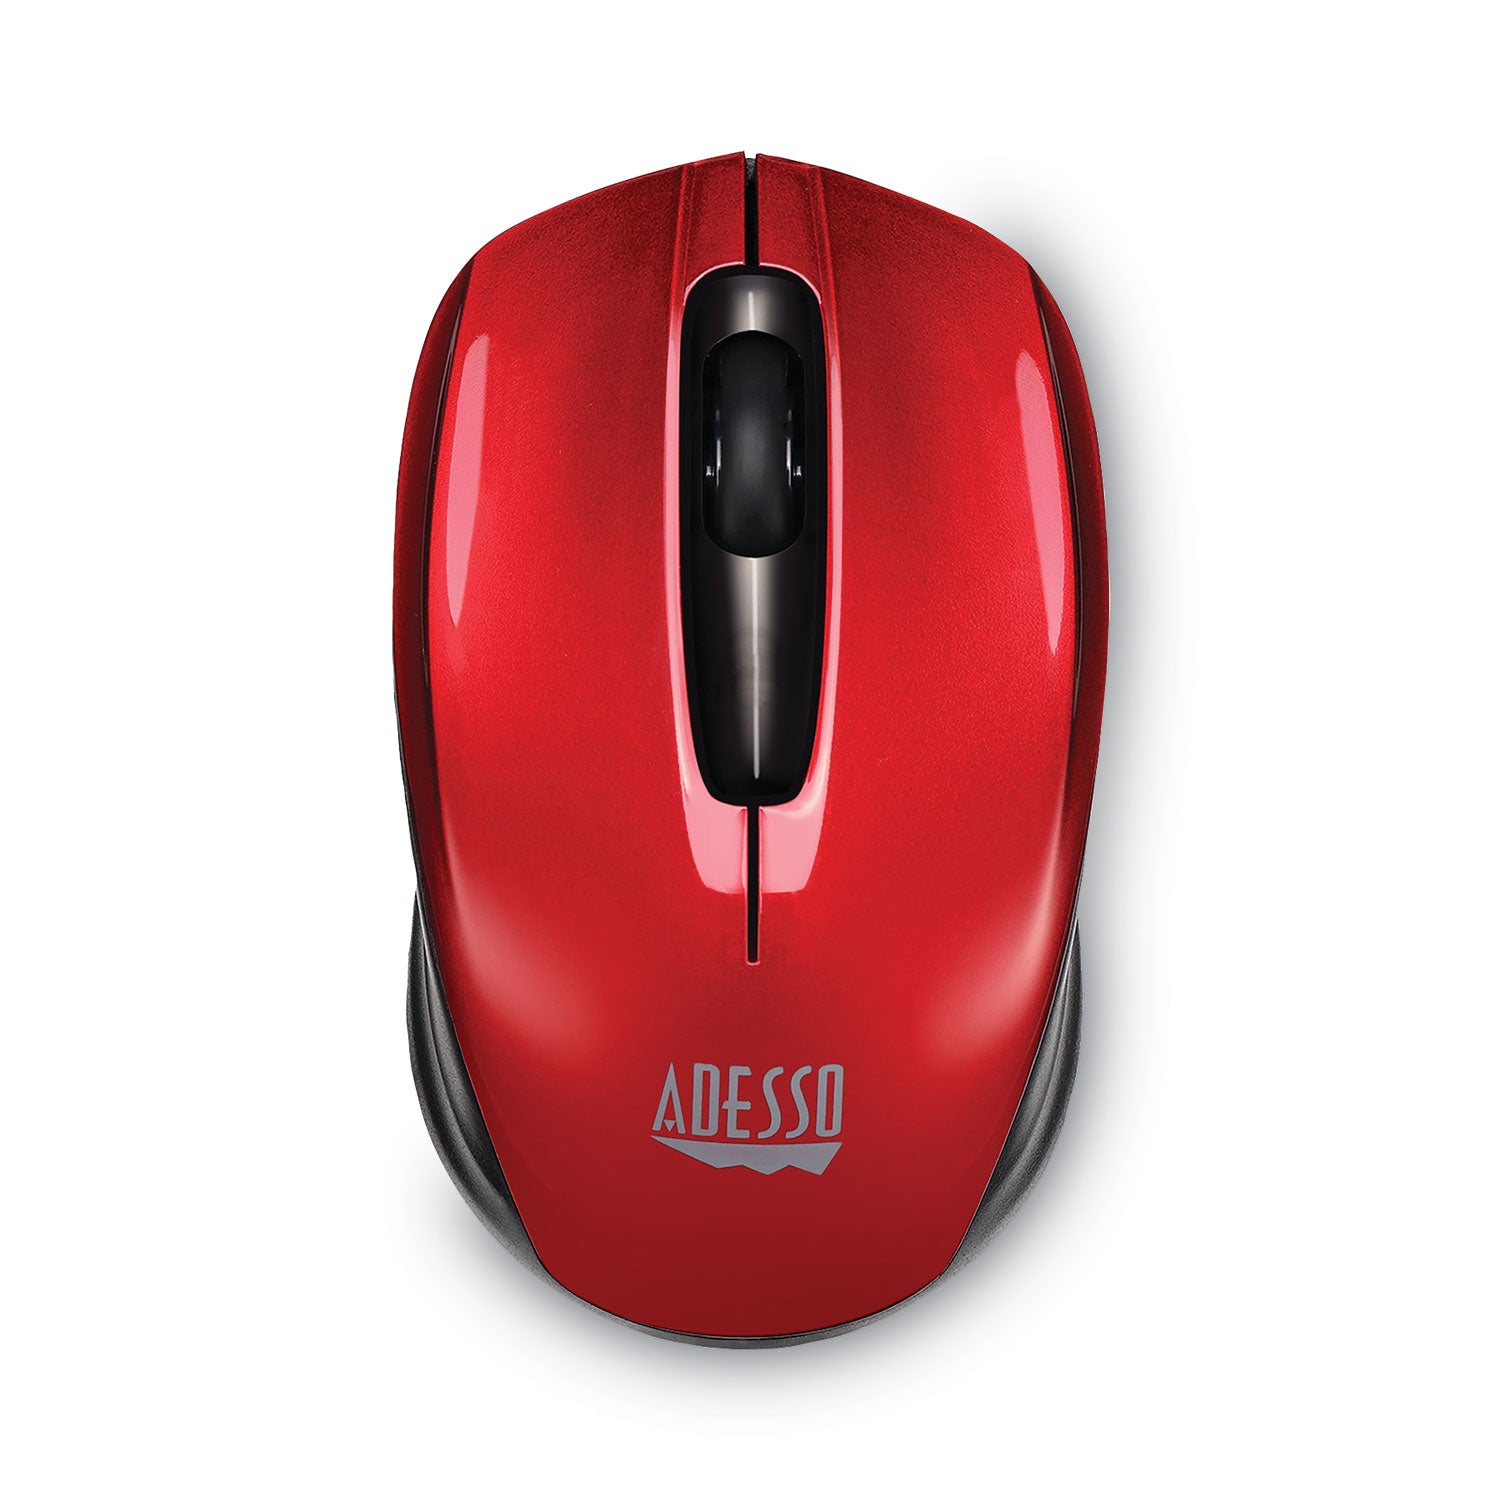 imouse-s50-wireless-mini-mouse-24-ghz-frequency-33-ft-wireless-range-left-right-hand-use-red_adeimouses50r - 1